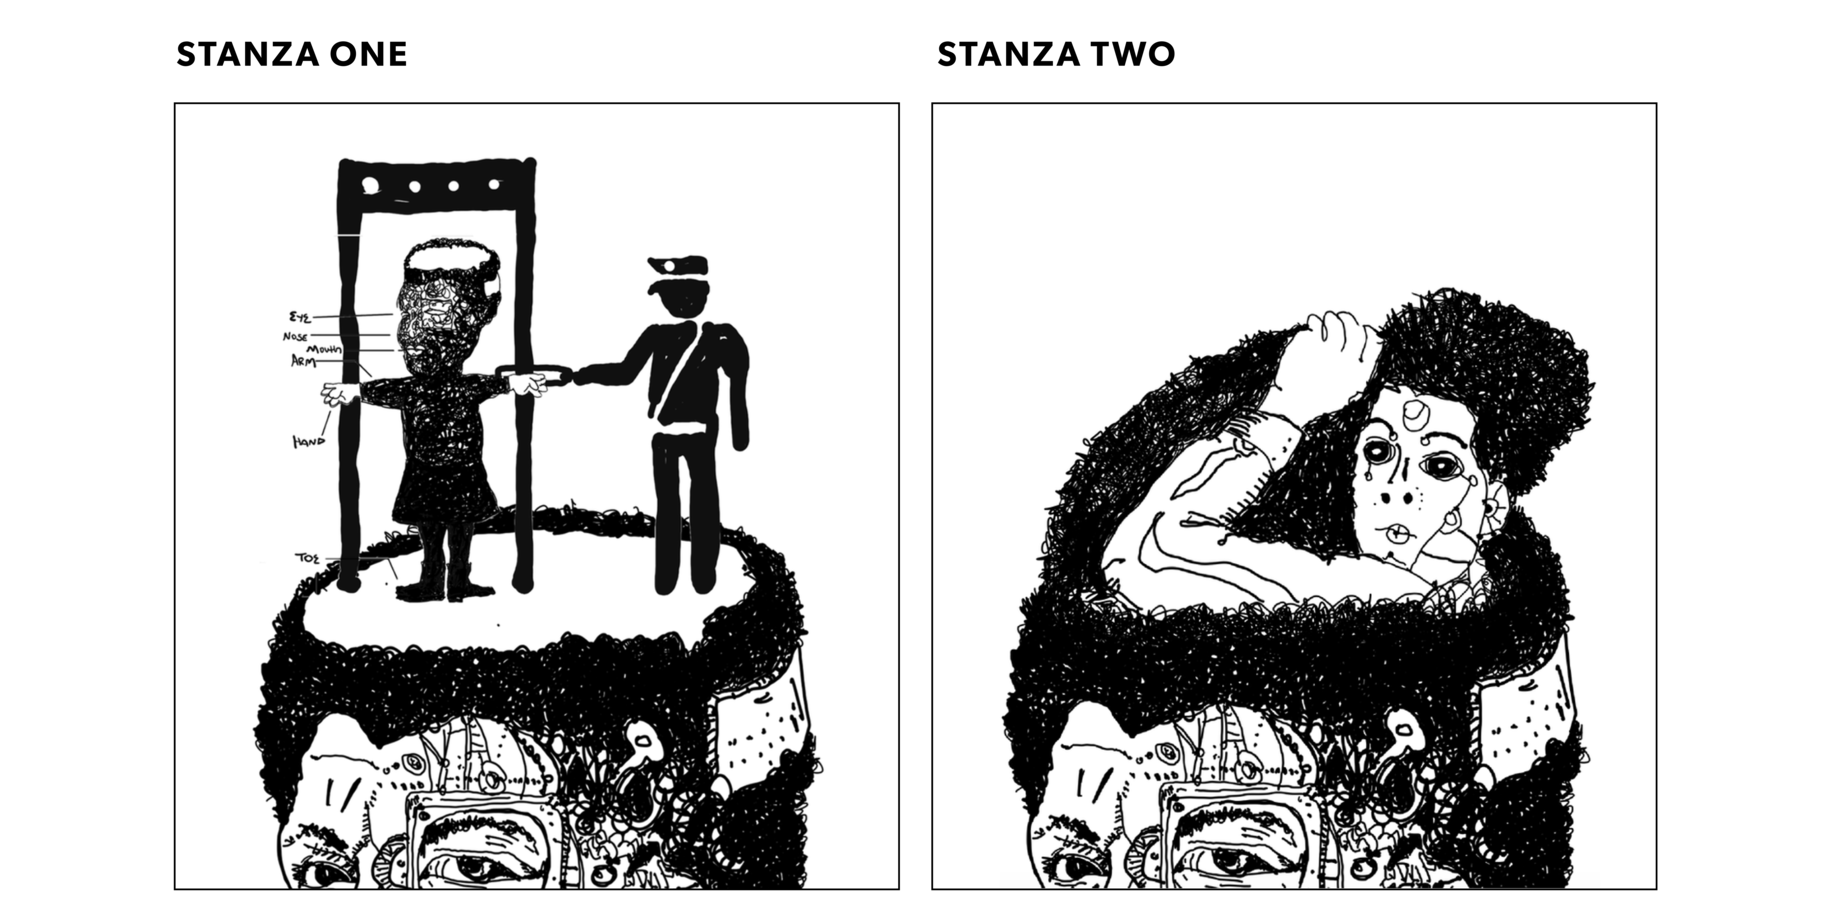 Drawings: Stanza 1 is the top of Octavia Butler’s head with a smaller version of the drawing held by a cop. Stanza 2 is a person climbing out of the head.